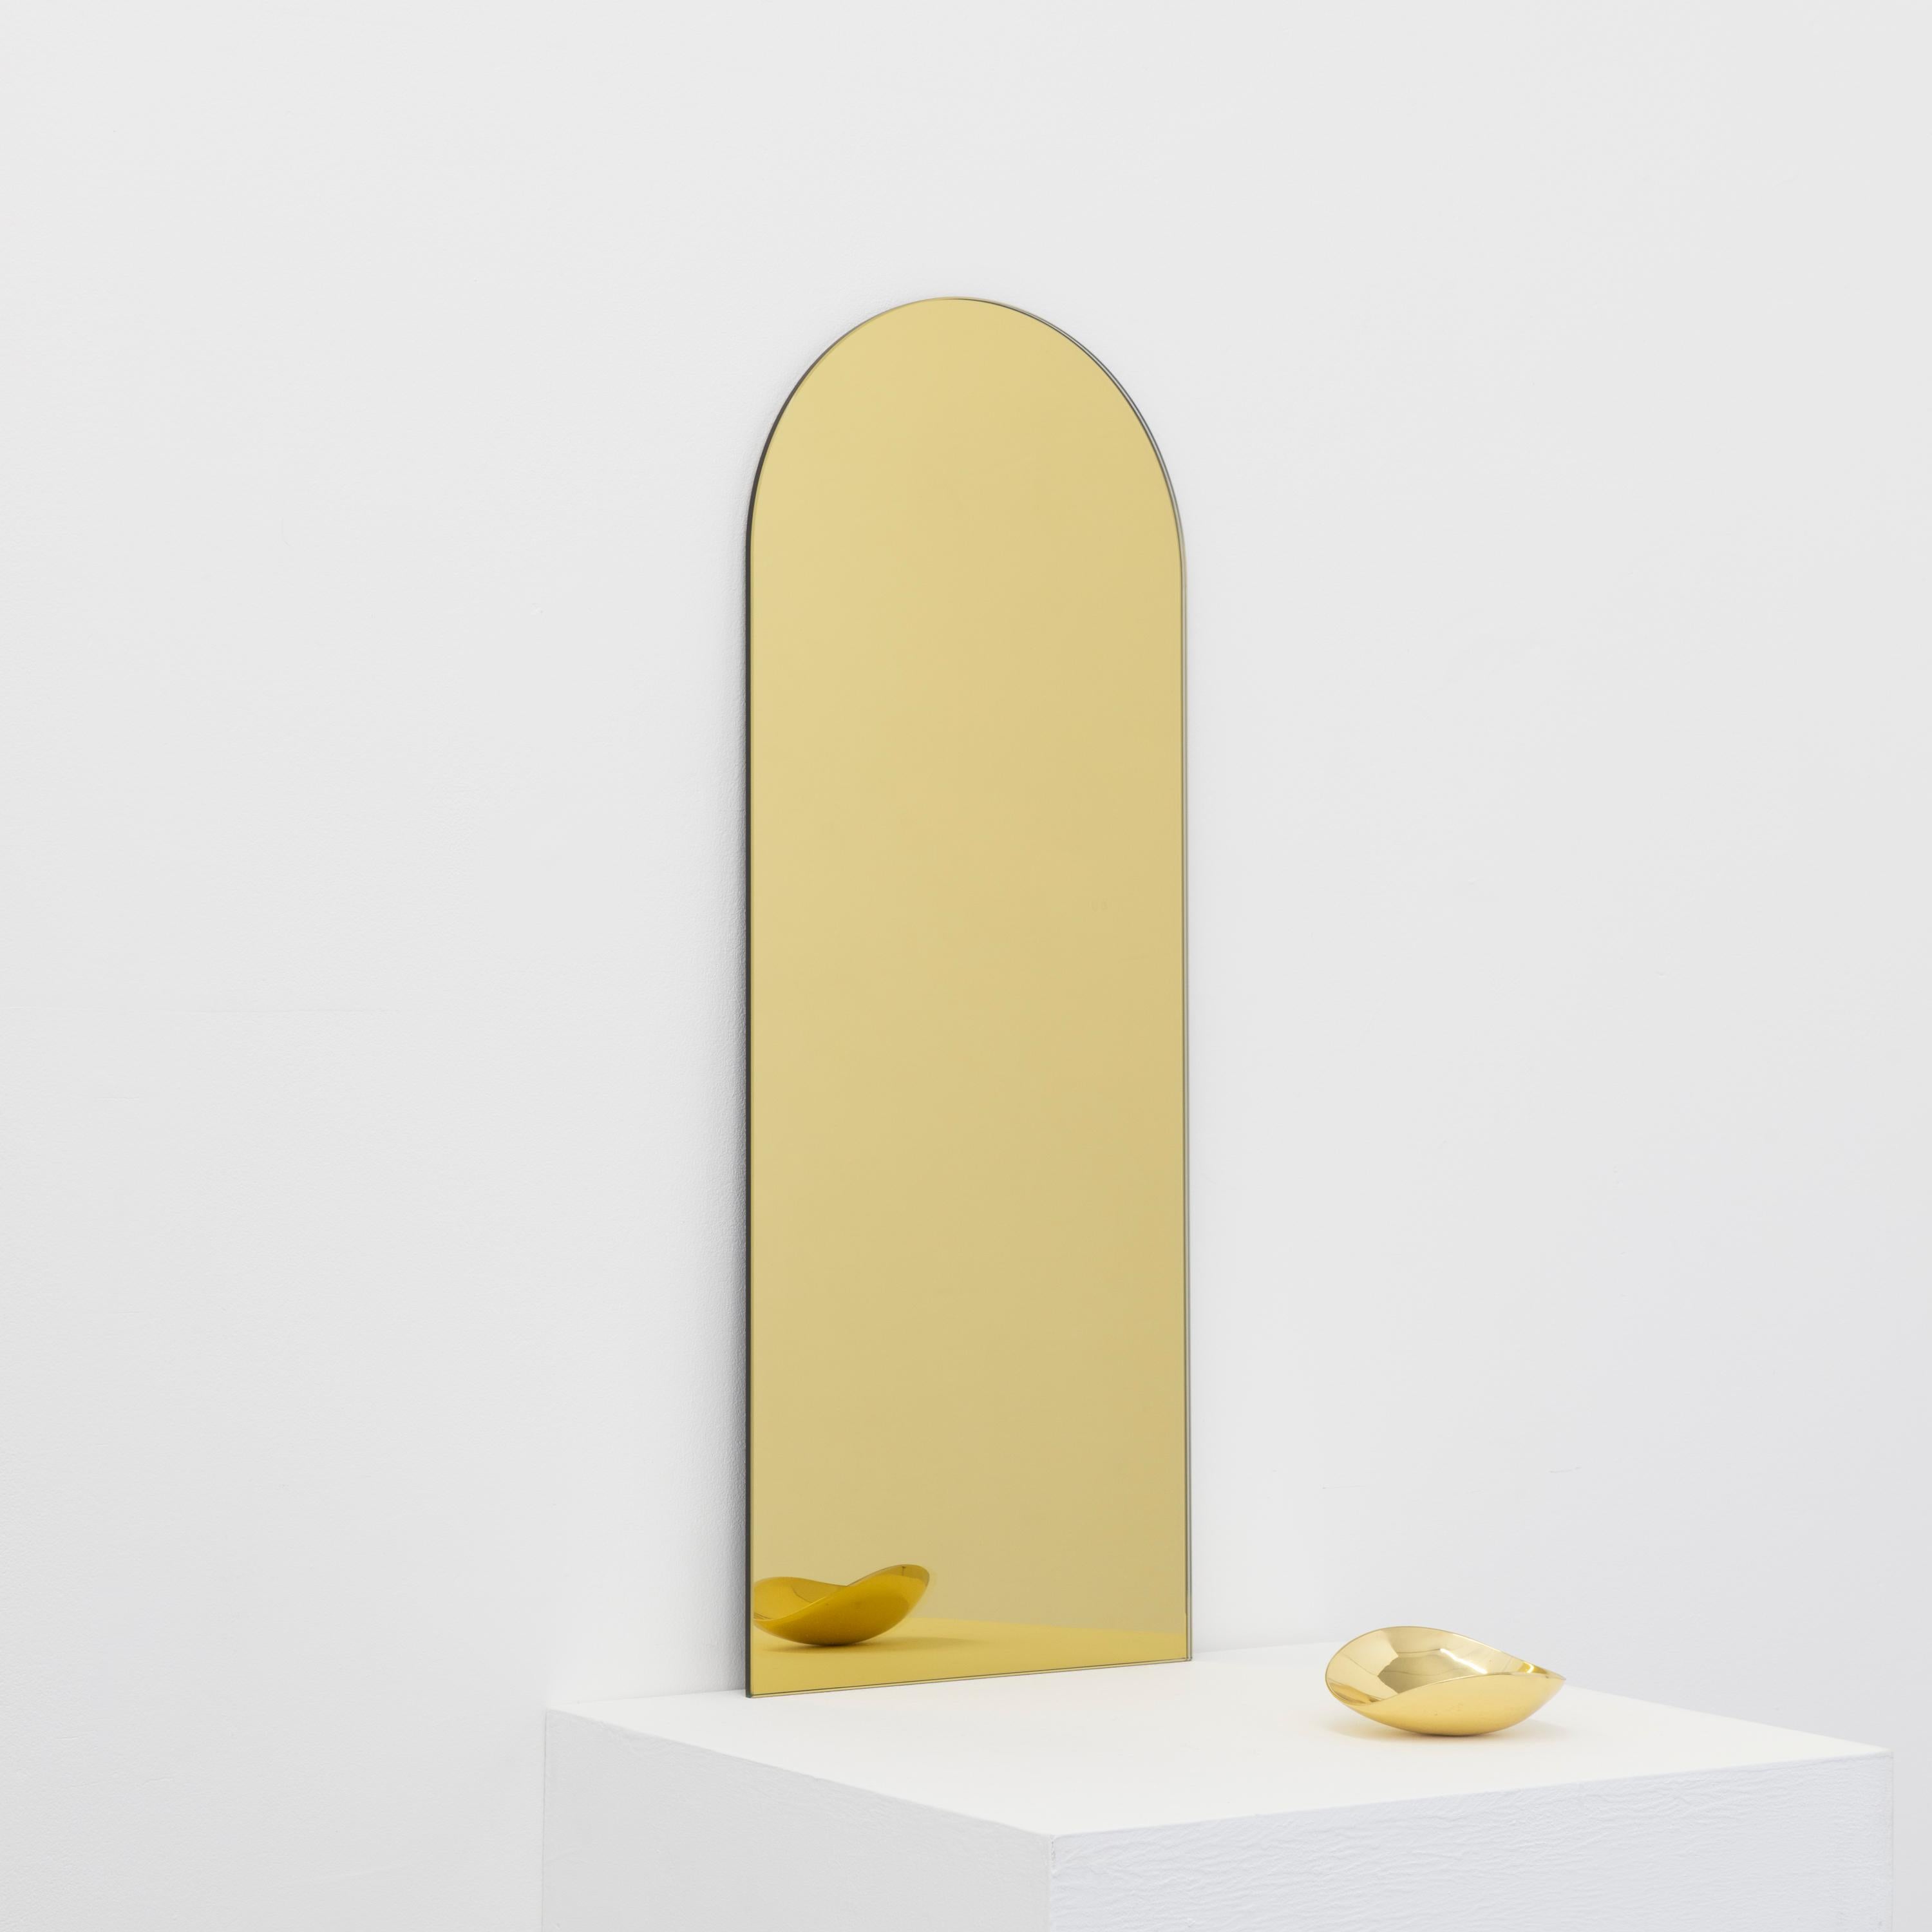 Minimalist rectangular shaped frameless gold mirror with a floating effect. Quality design that ensures the mirror sits perfectly parallel to the wall. Designed and made in London, UK.

Fitted with professional plates not visible once installed for